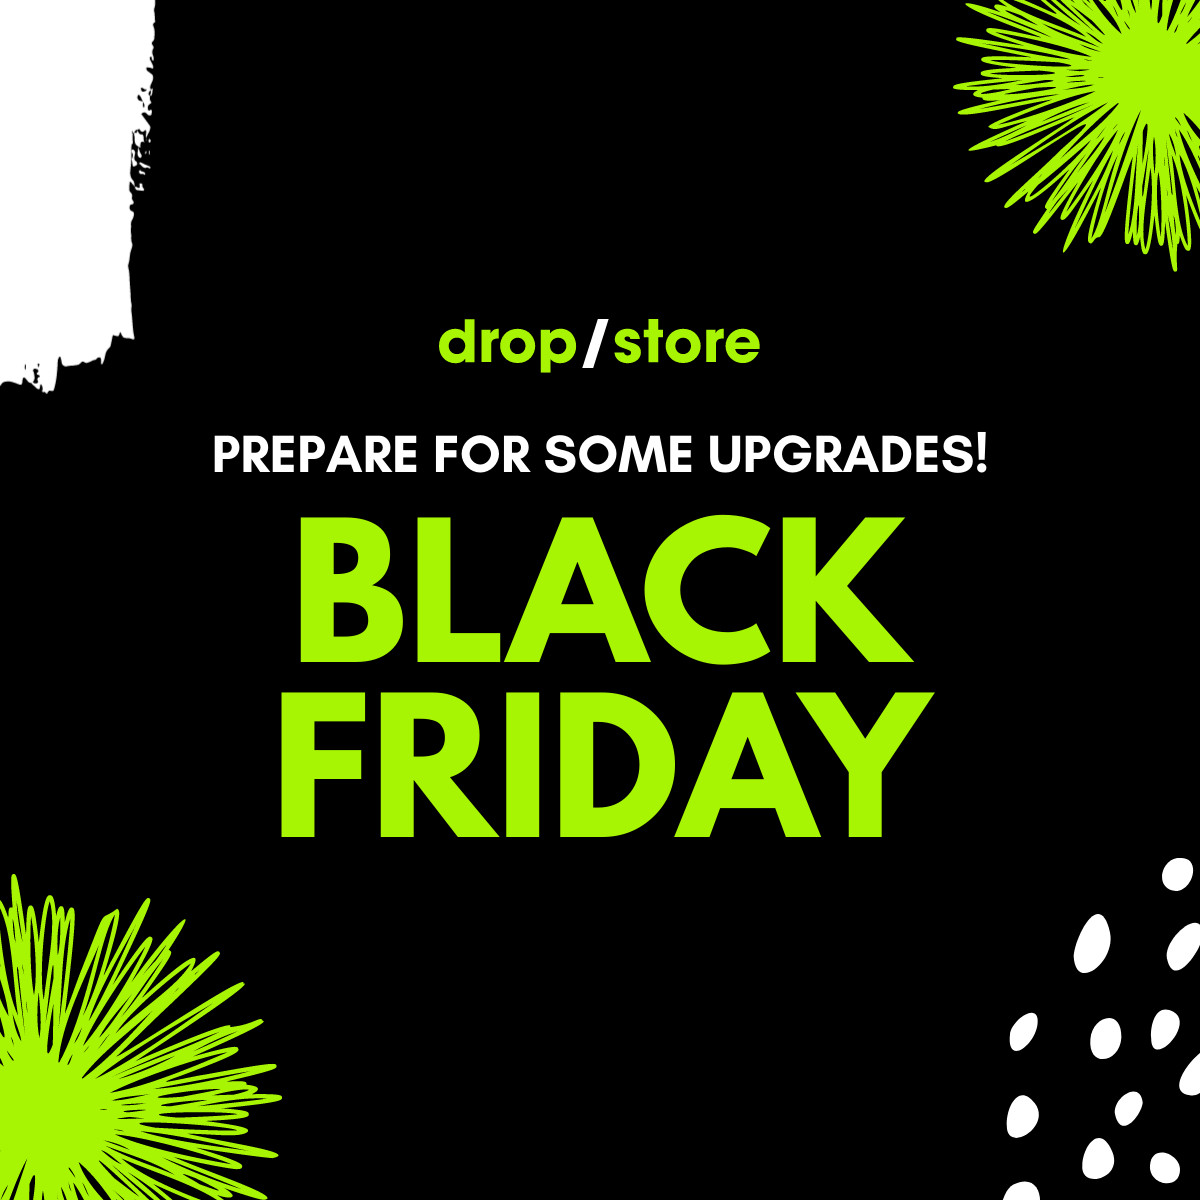 Black Friday Prepare for Upgrades Inline Rectangle 300x250